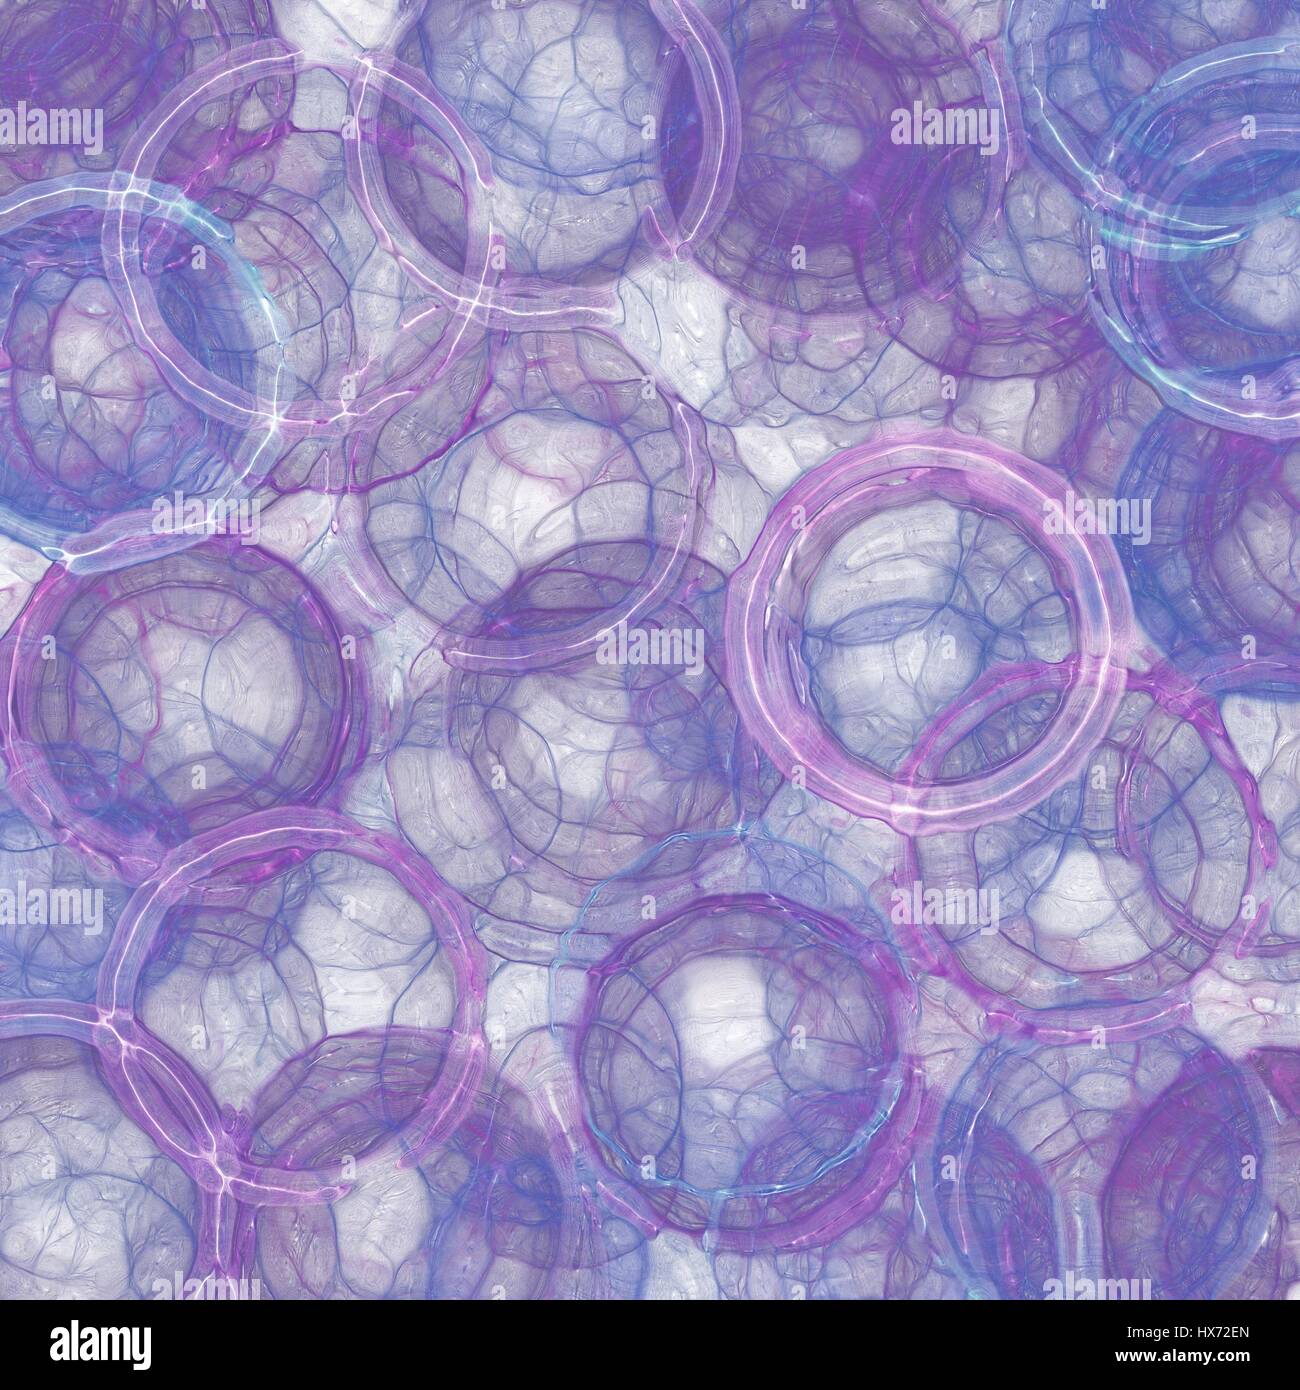 abstract stained glass textured blue and purple background, rings and circle shapes in random pattern Stock Photo